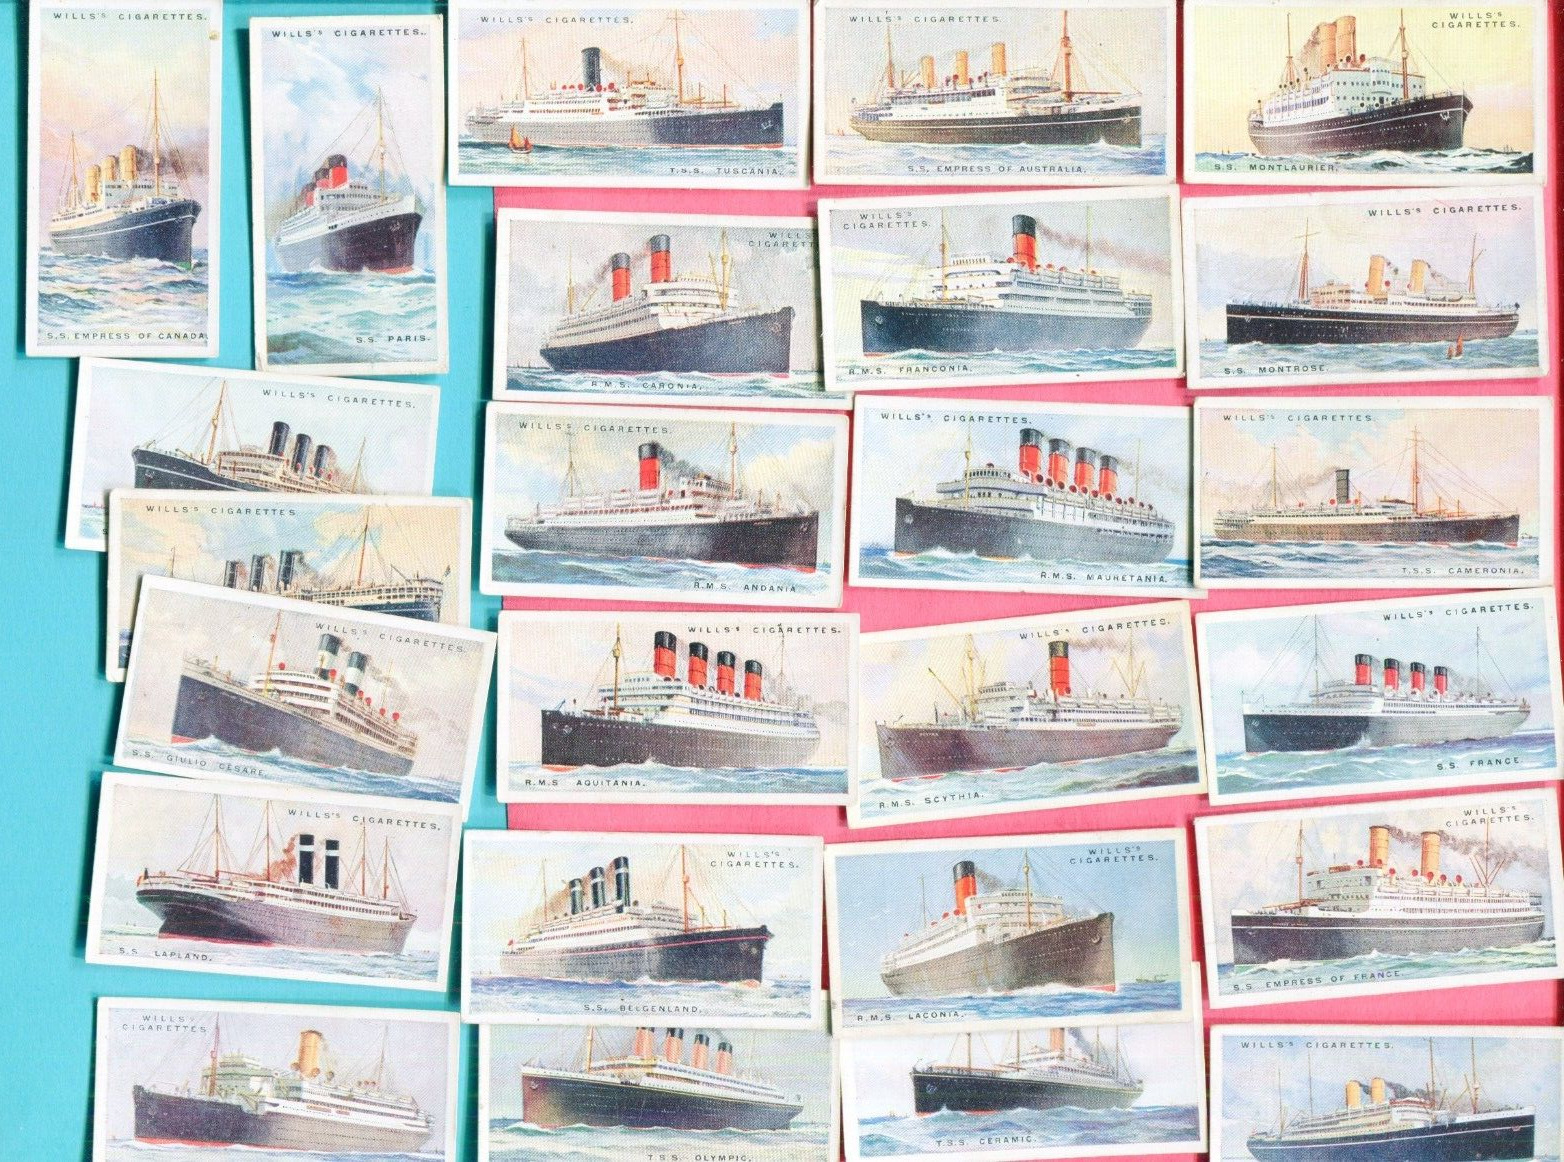 1924 W.D. & HO. WILLS CIGARETTES MERCHANT SHIPS OF THE WORLD 25 TOBACCO CARD LOT